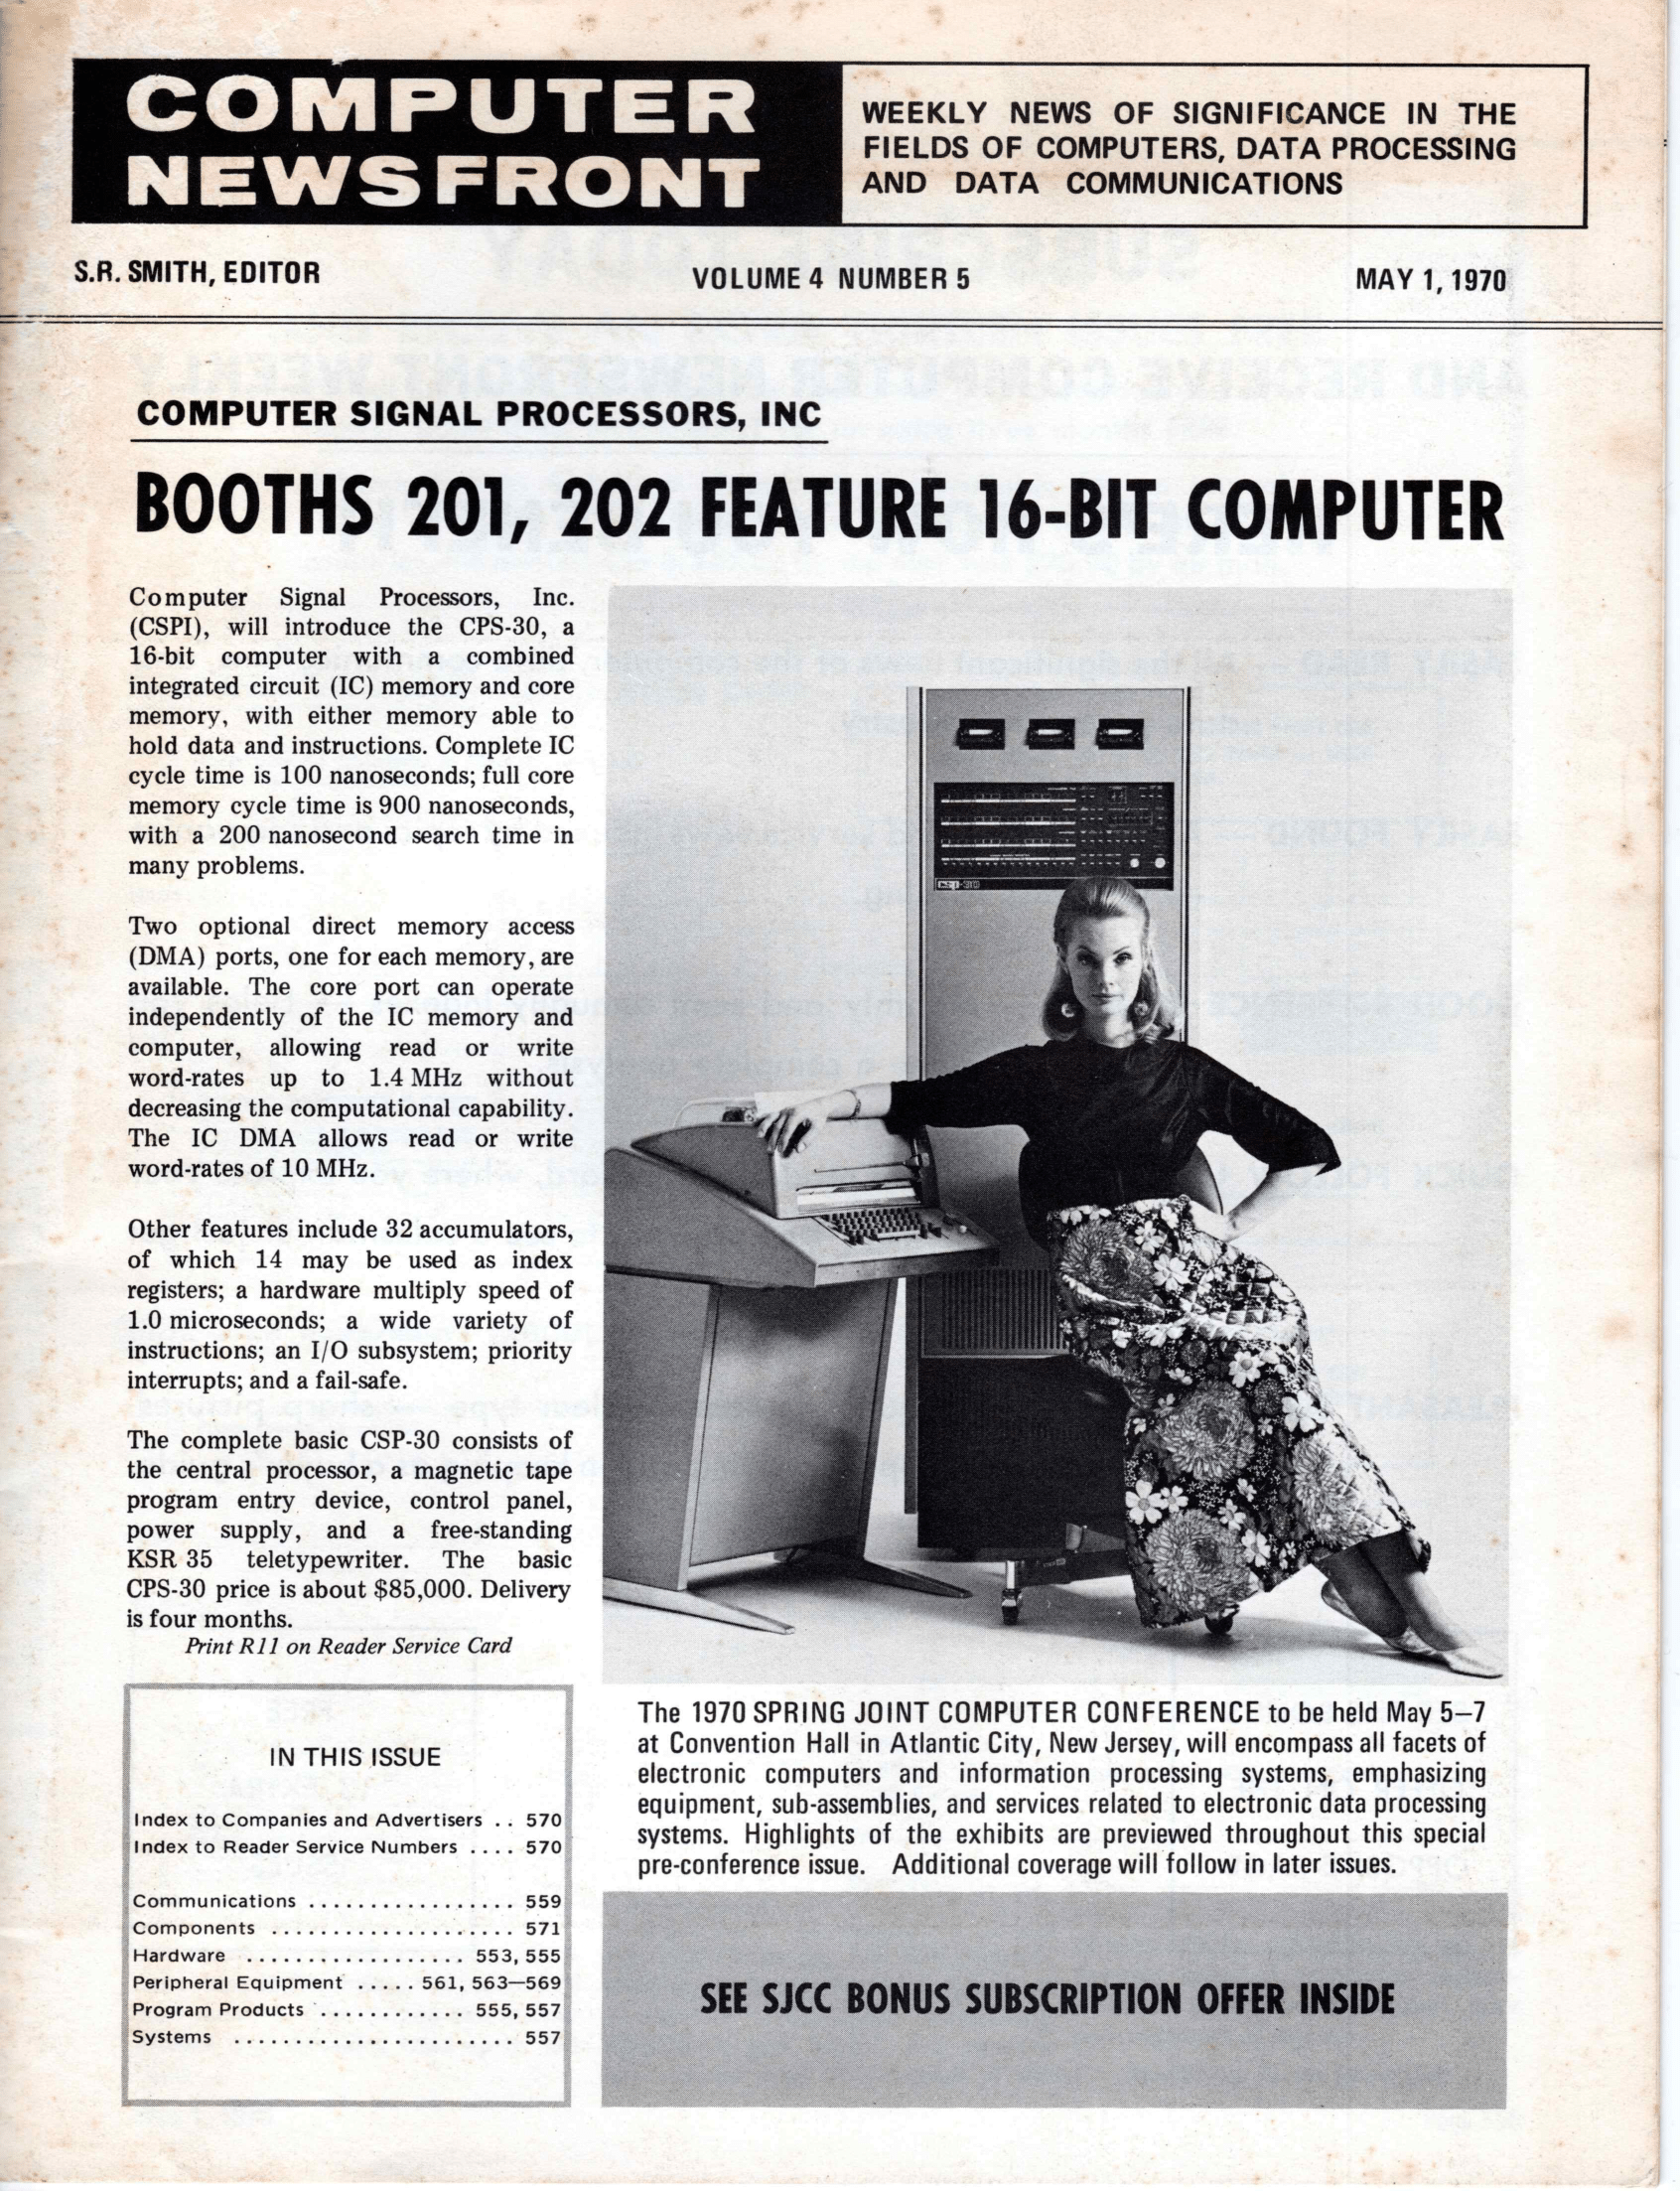 Computer Newsfront Volume 4 Number 5 (May 1, 1970)